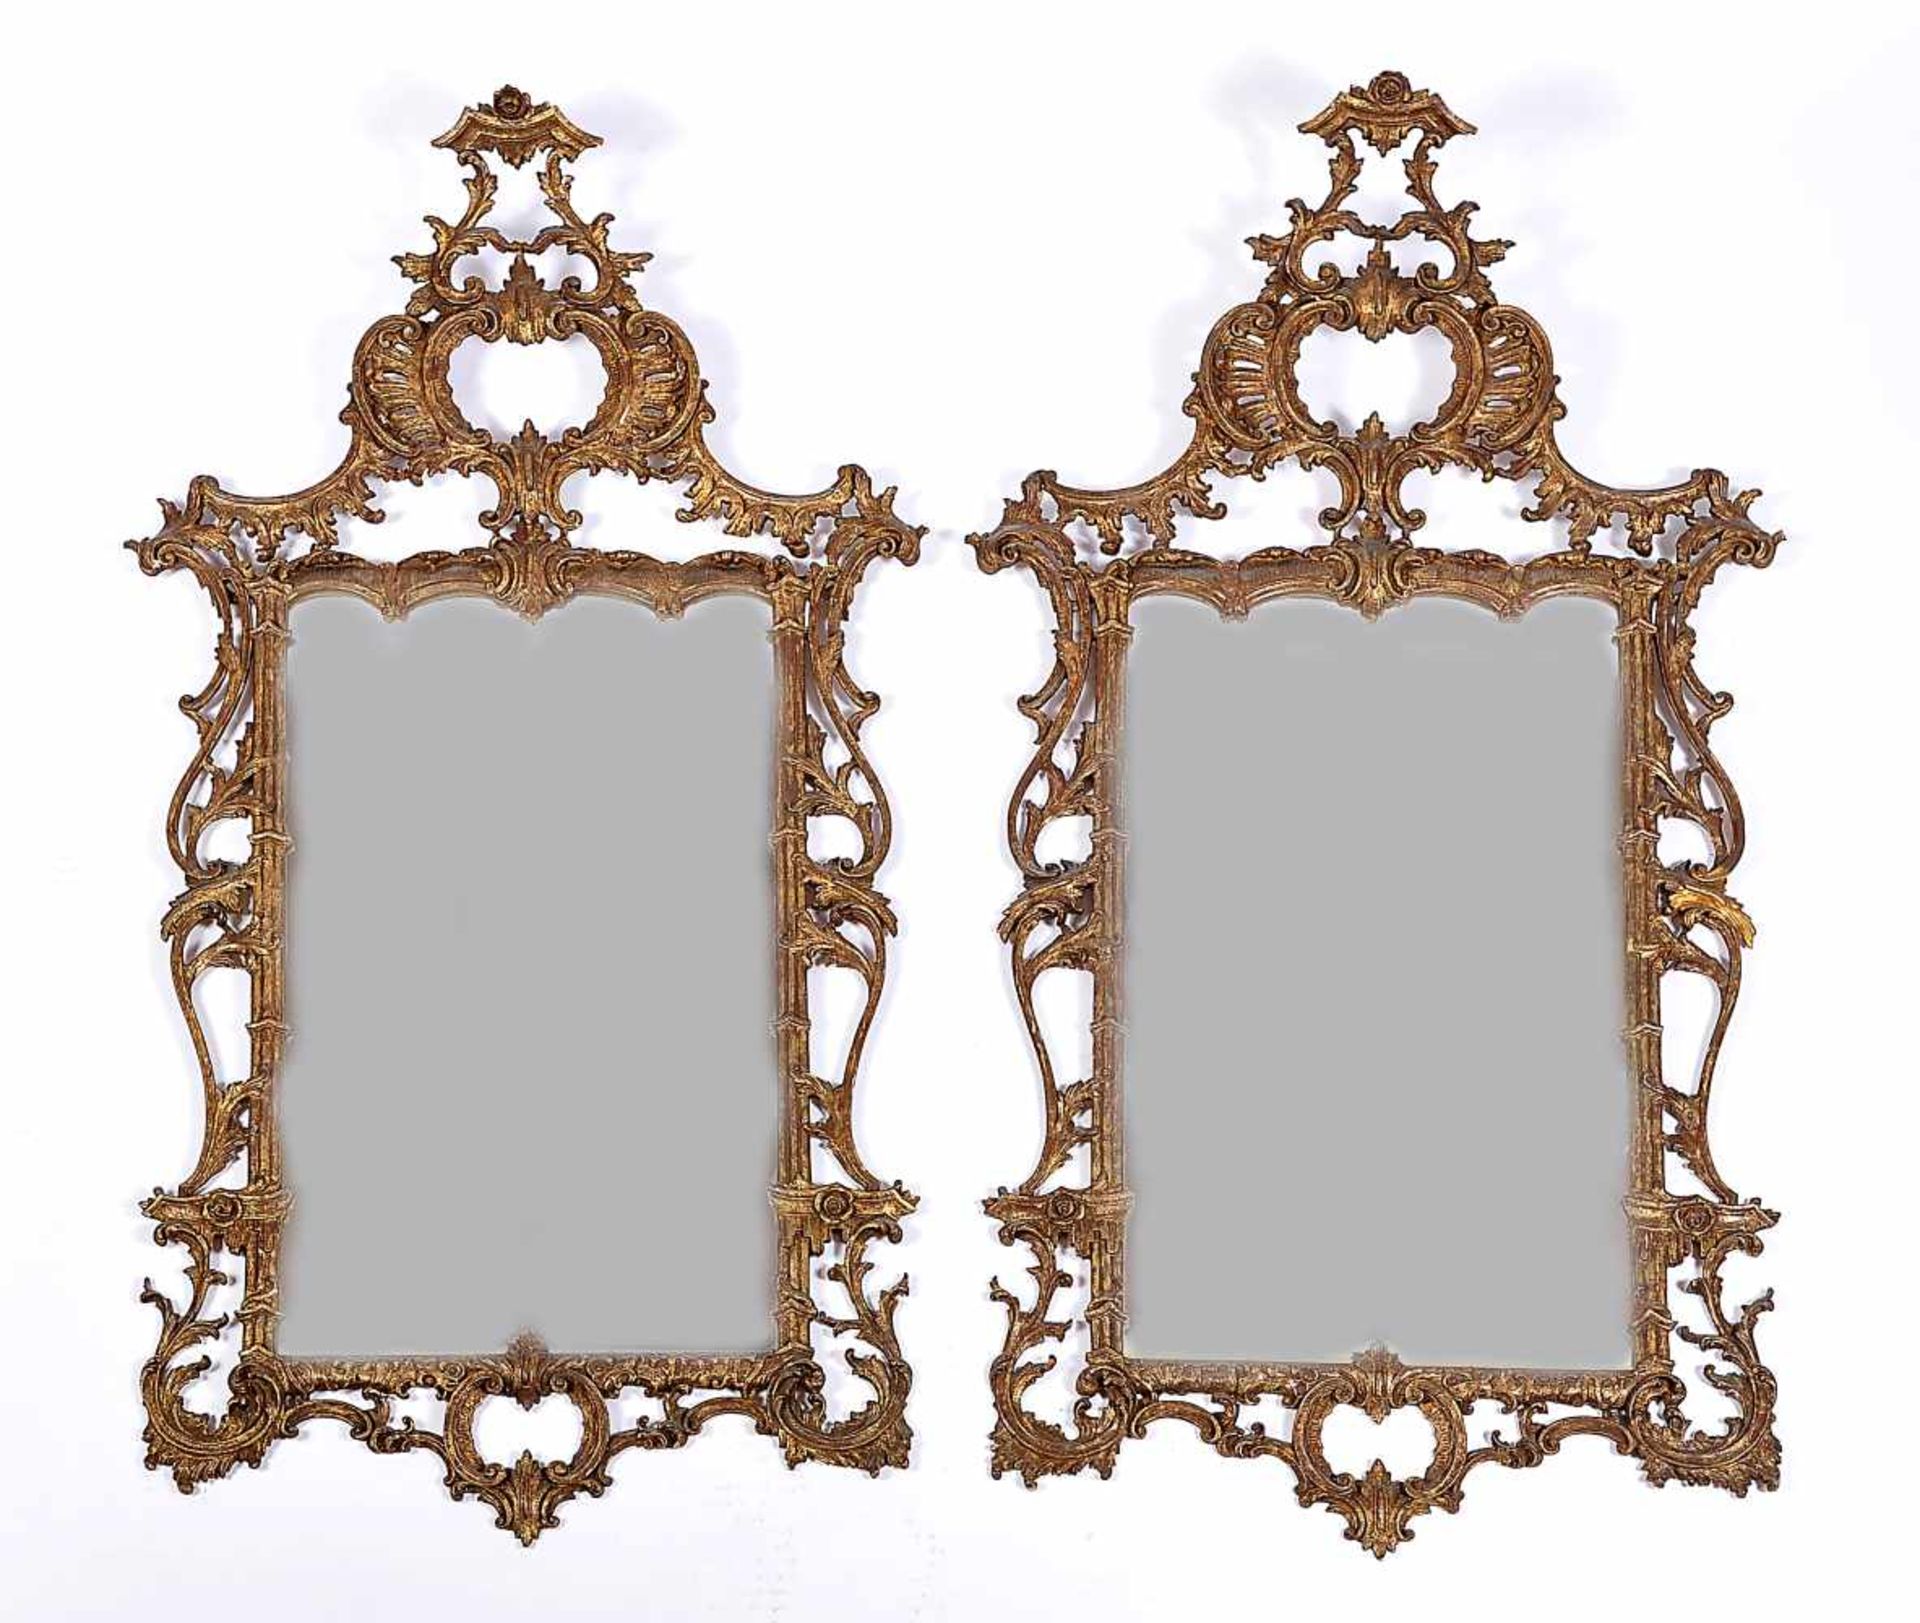 A Pair of Mirrors, George II (1726-1760), carved, pierced and gilt wood frames, English, faults on